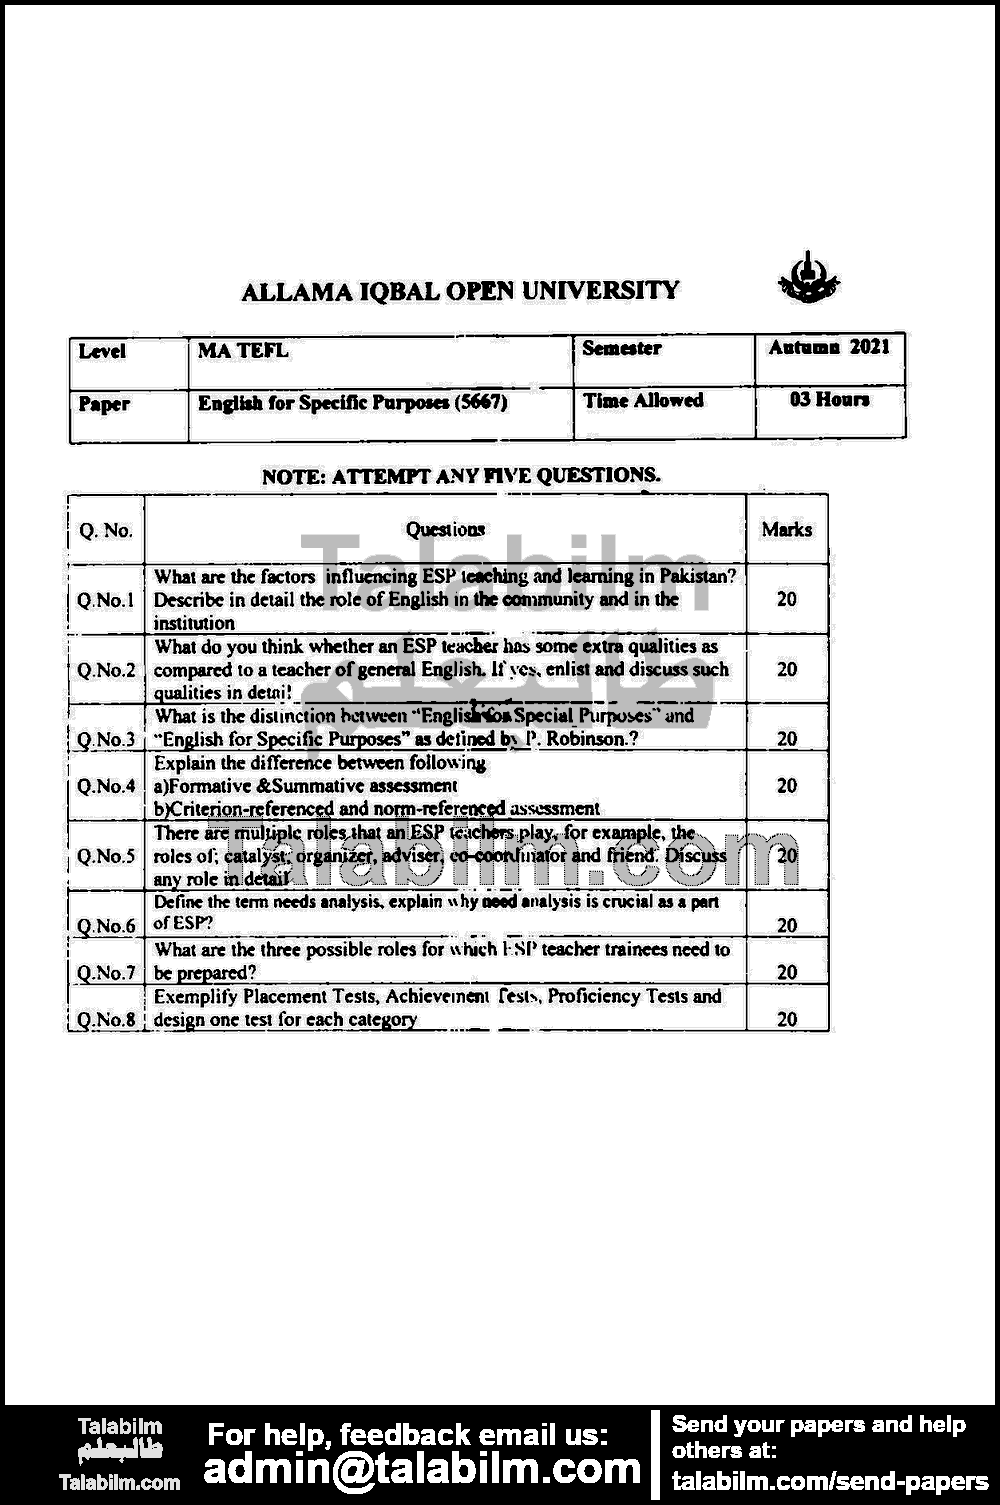 English For Specific Purposes 5667 past paper for Autumn 2021